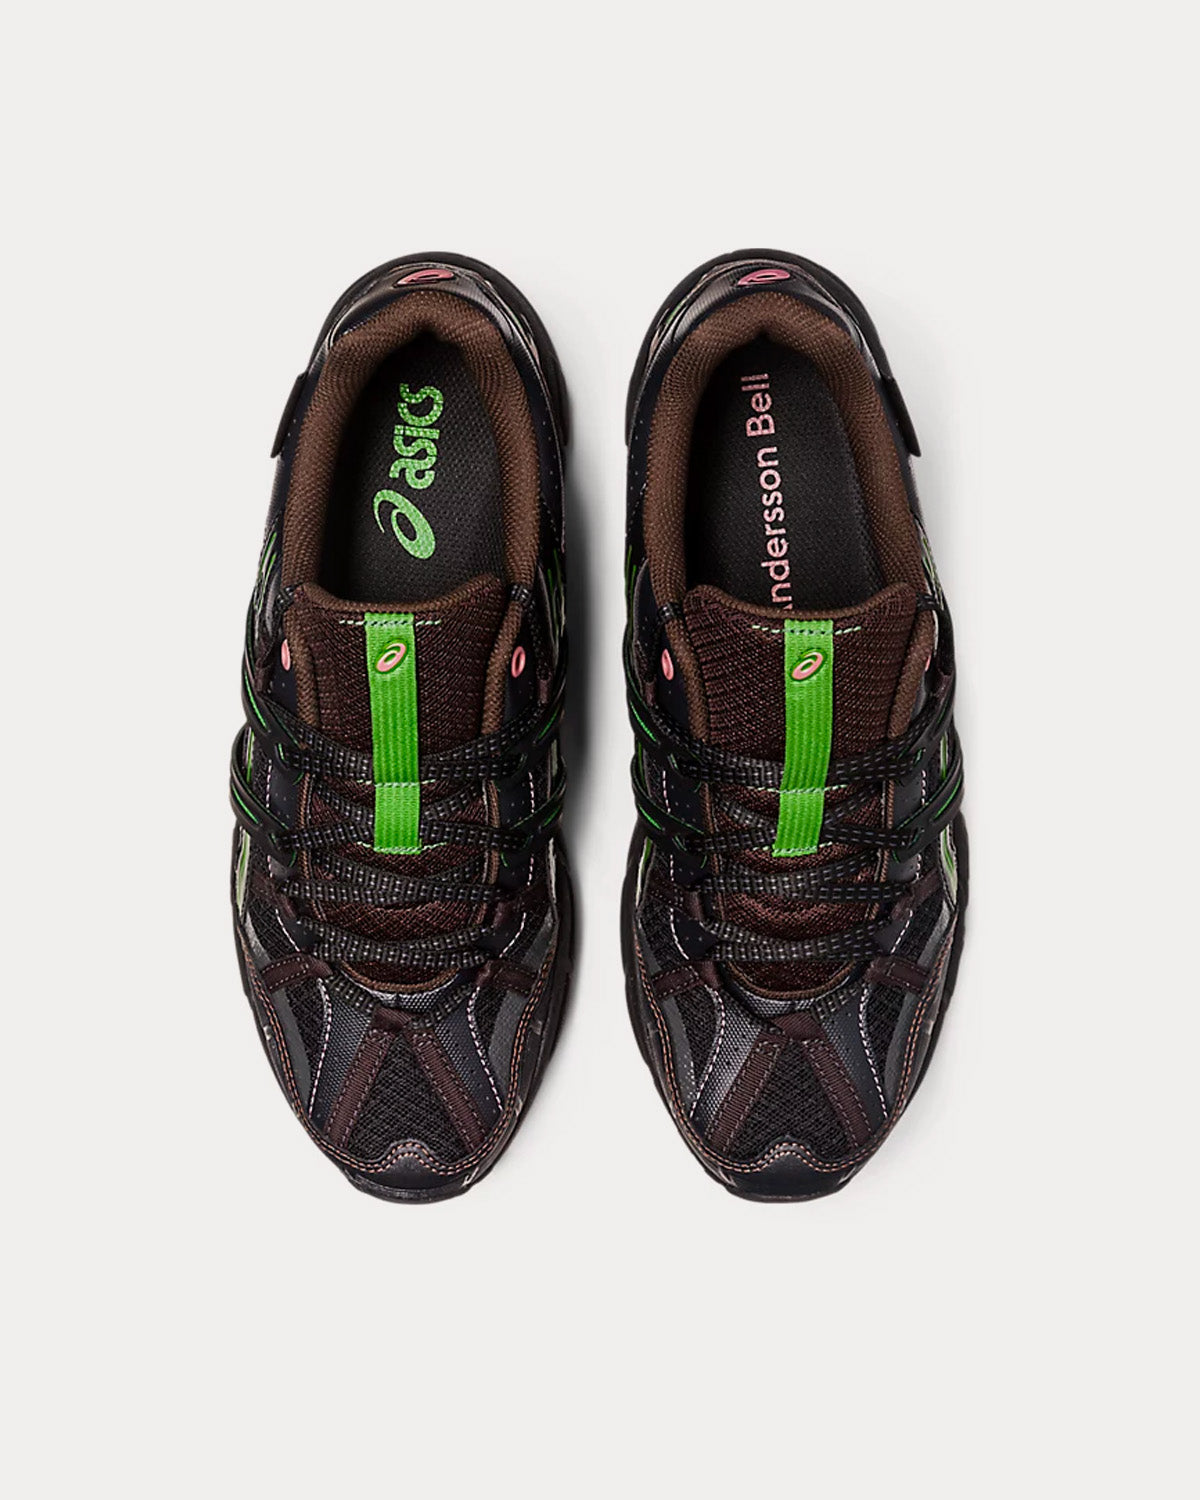 Asics x Andersson Bell - Gel-Sonoma 15-50 Black / Green Low Top Sneakers